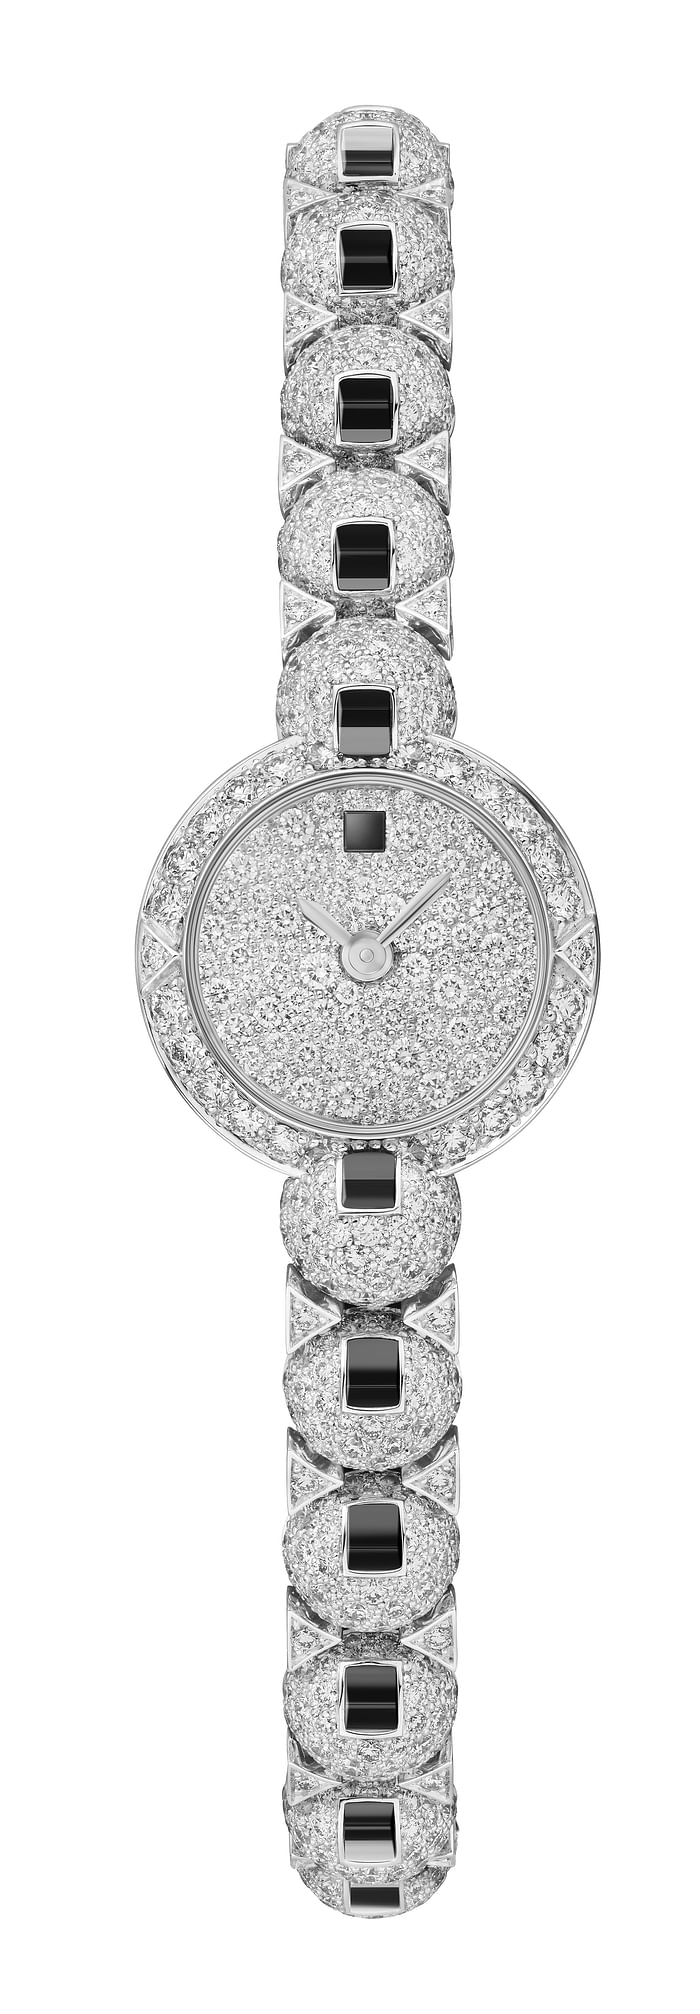 Cartier unveils its new jewellery watches ahead of Watches & Wonders ...